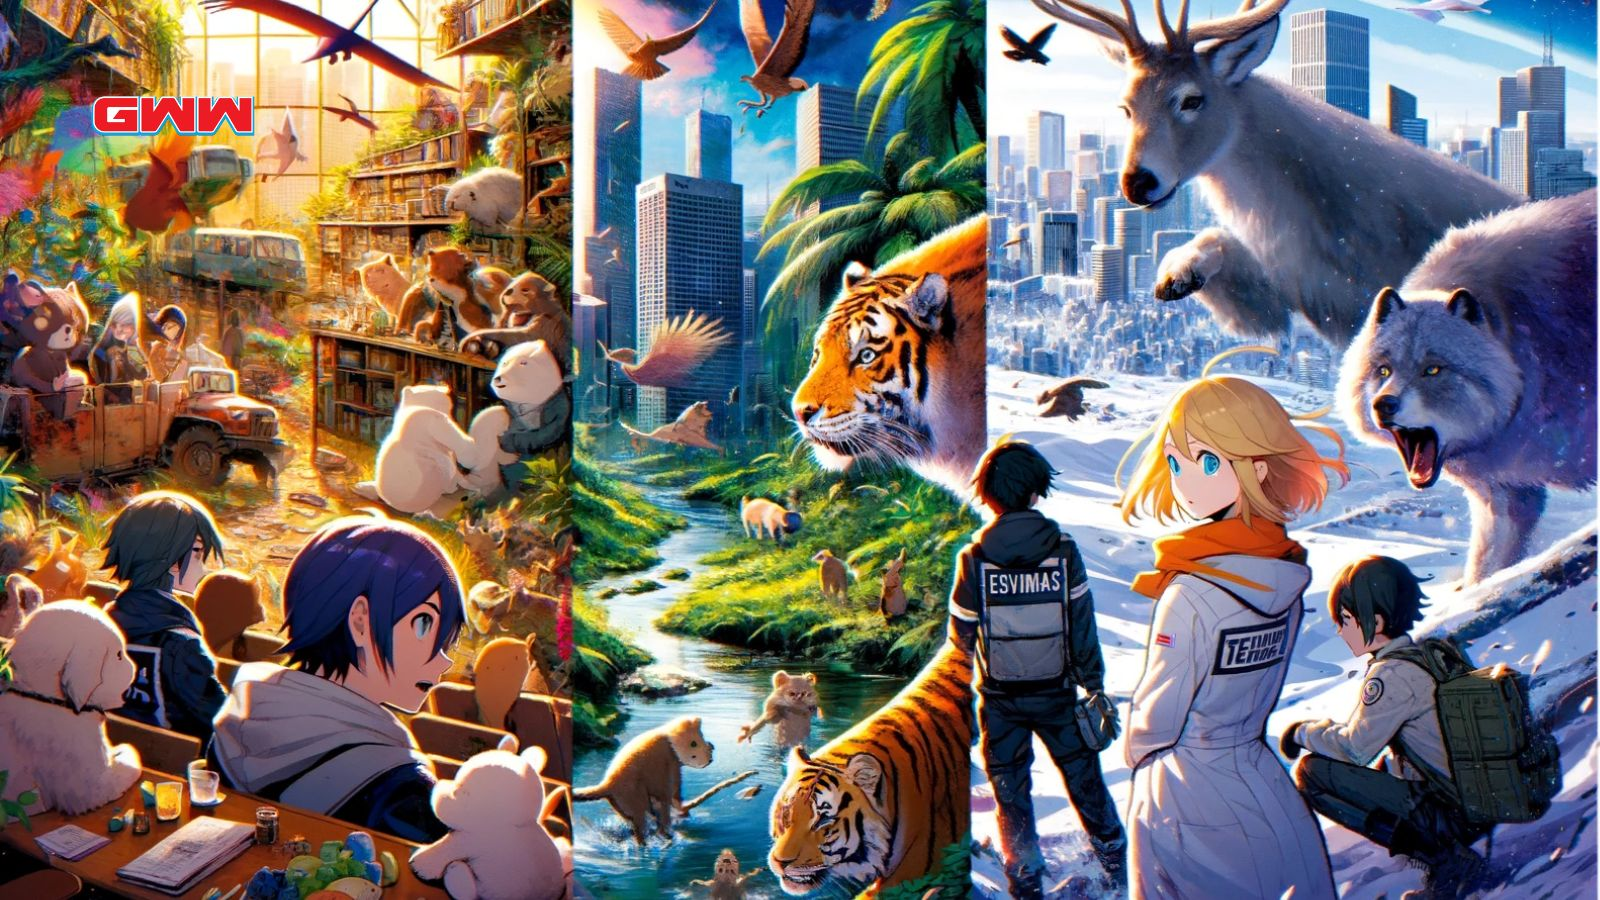 Furry anime characters in Japari Park, post-apocalyptic Tokyo, and dramatic scene